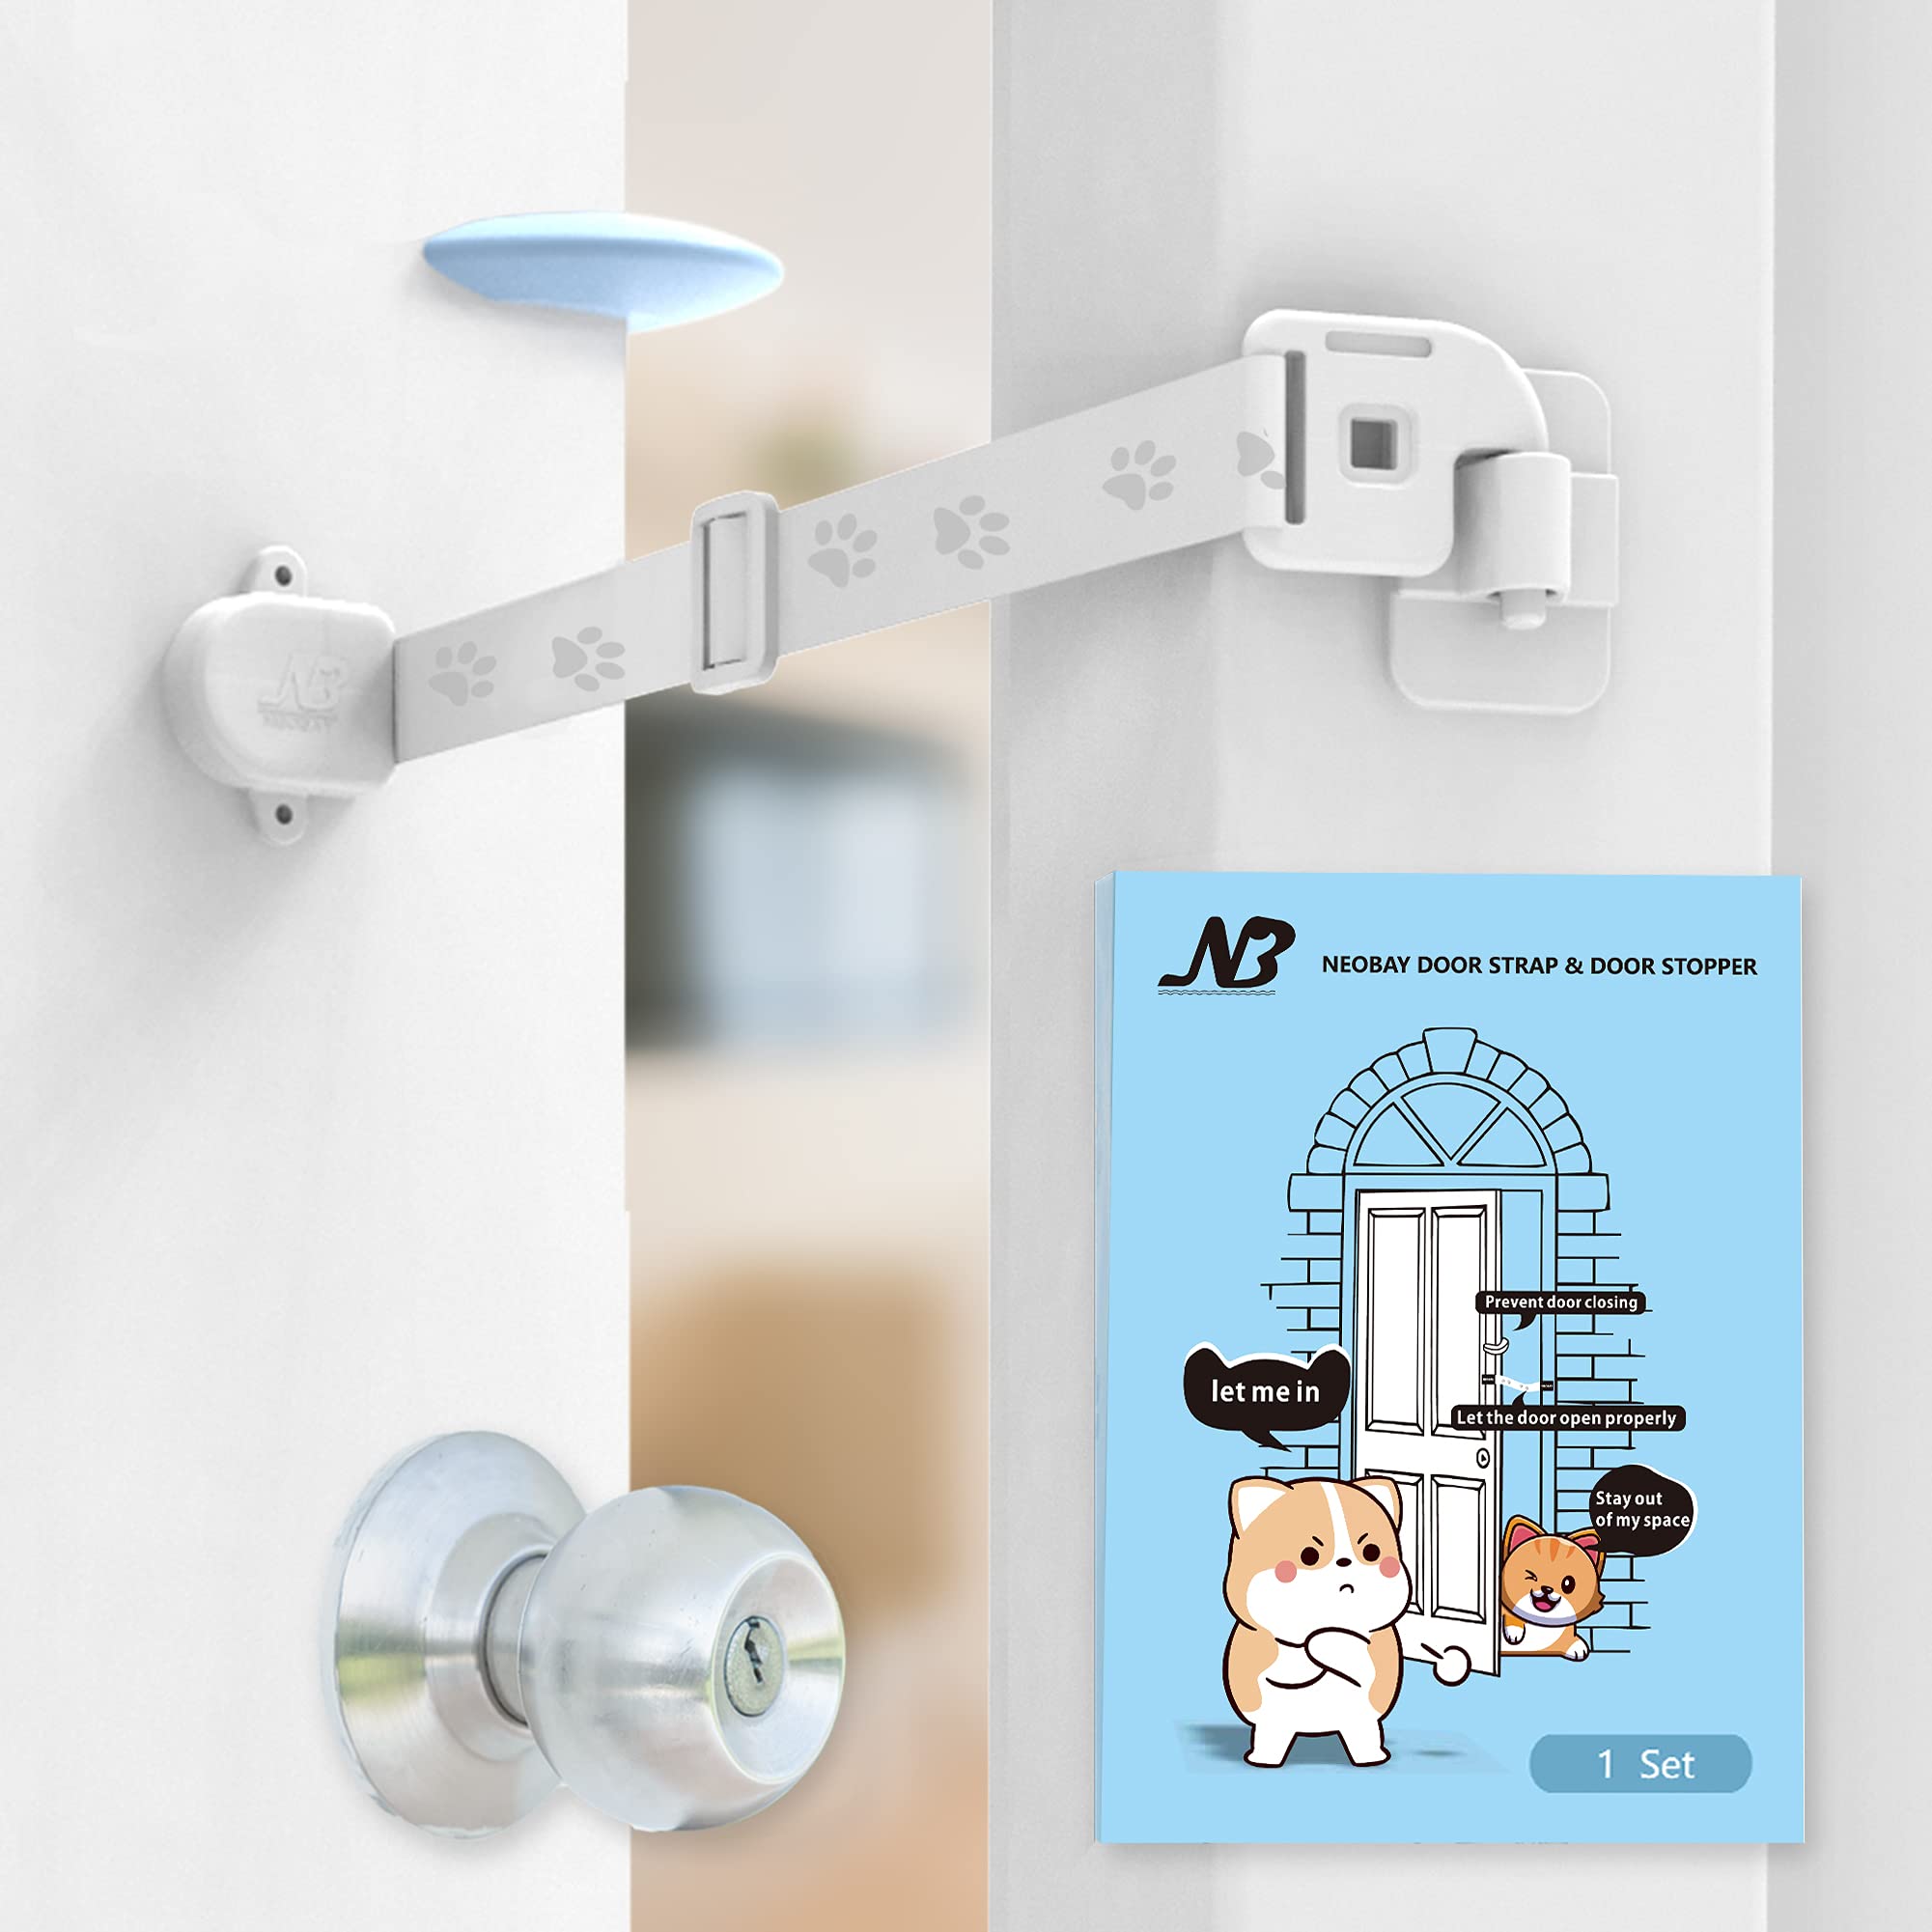  Neobay Child Proof Door Strap with Silicone Door Stopper. No  Need for Baby-Gate. Keep Toddler Out and Let Cat in. Prevents Finger Pinch  Injuries. : Baby